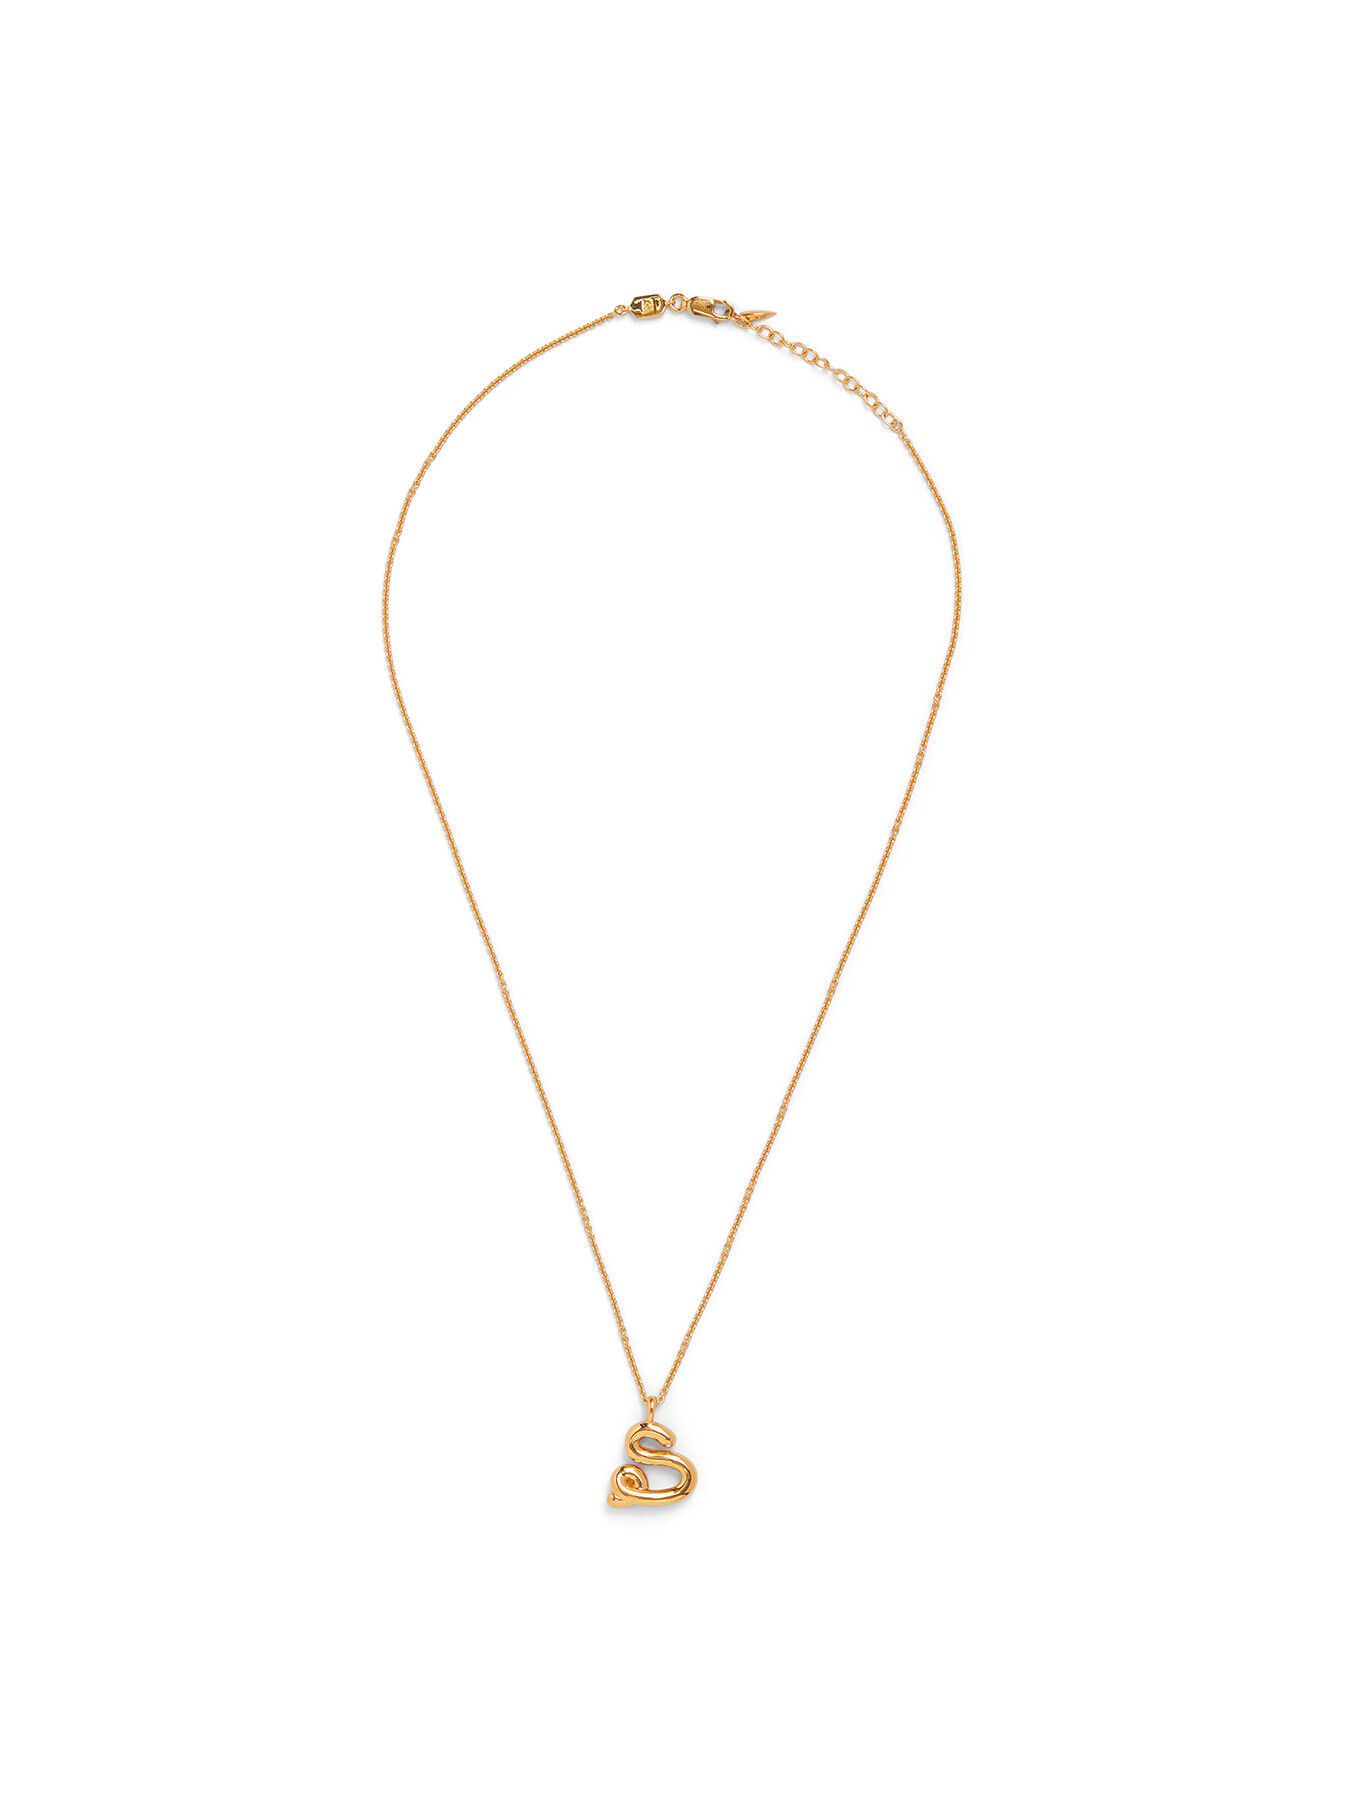 Jess Ann Kirby picks the Missoma Initial necklace as one of her favorites  from December 2018 | Fashion, Womens fashion, Style